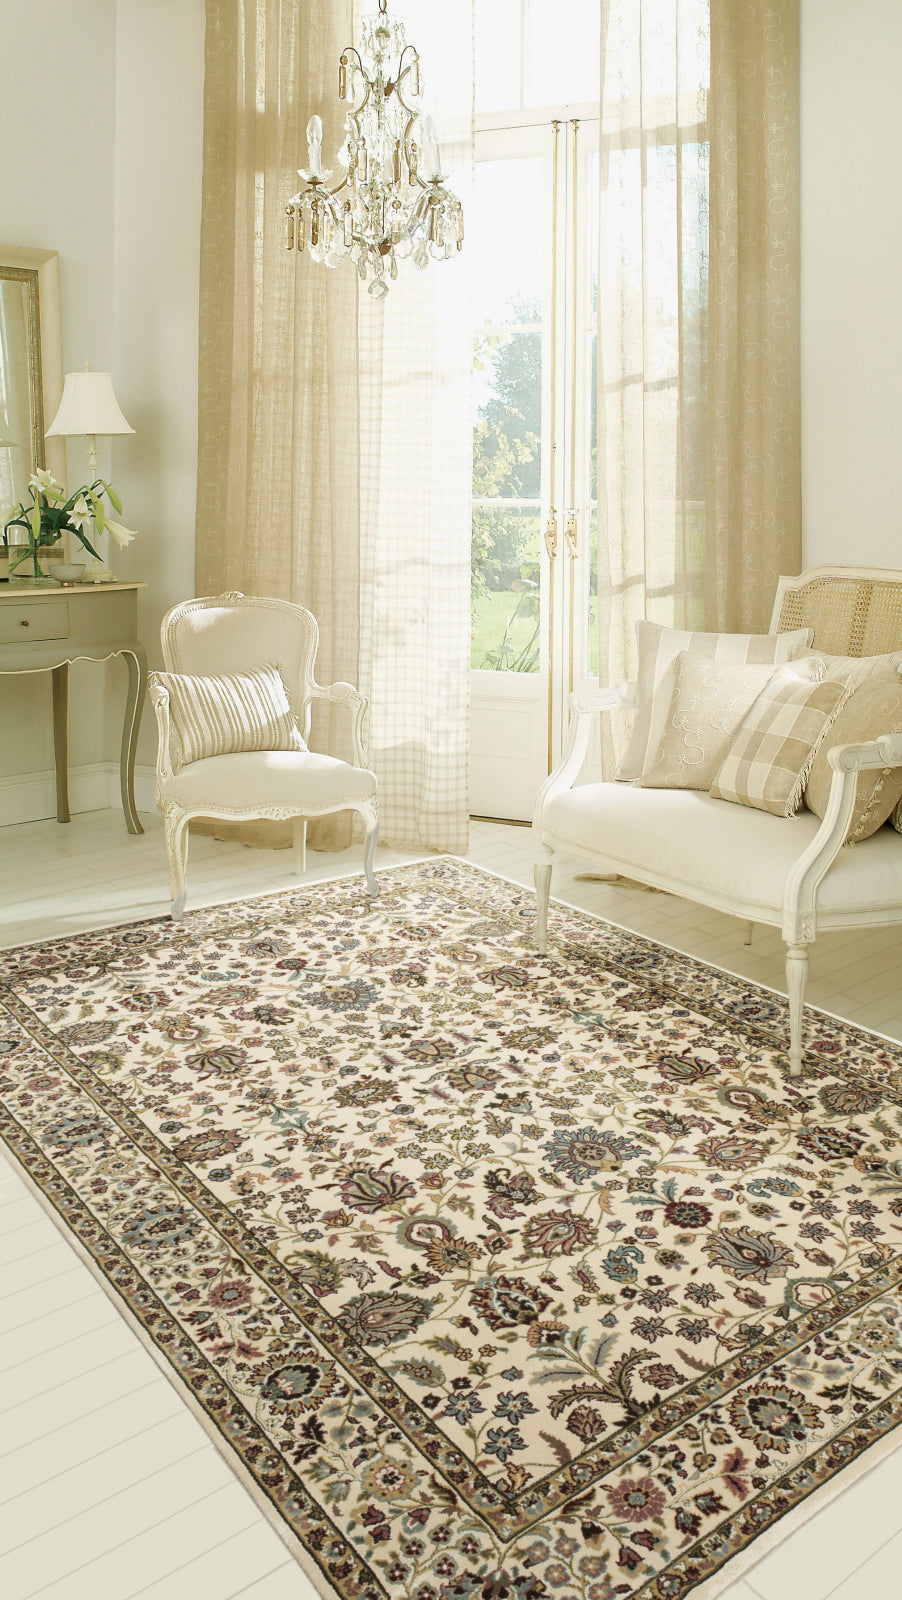 Nourison Antiquities ANT04 Royal Countryside Ivory Area Rug by Kathy Ireland 6' X 8' Living Space Shot Feature